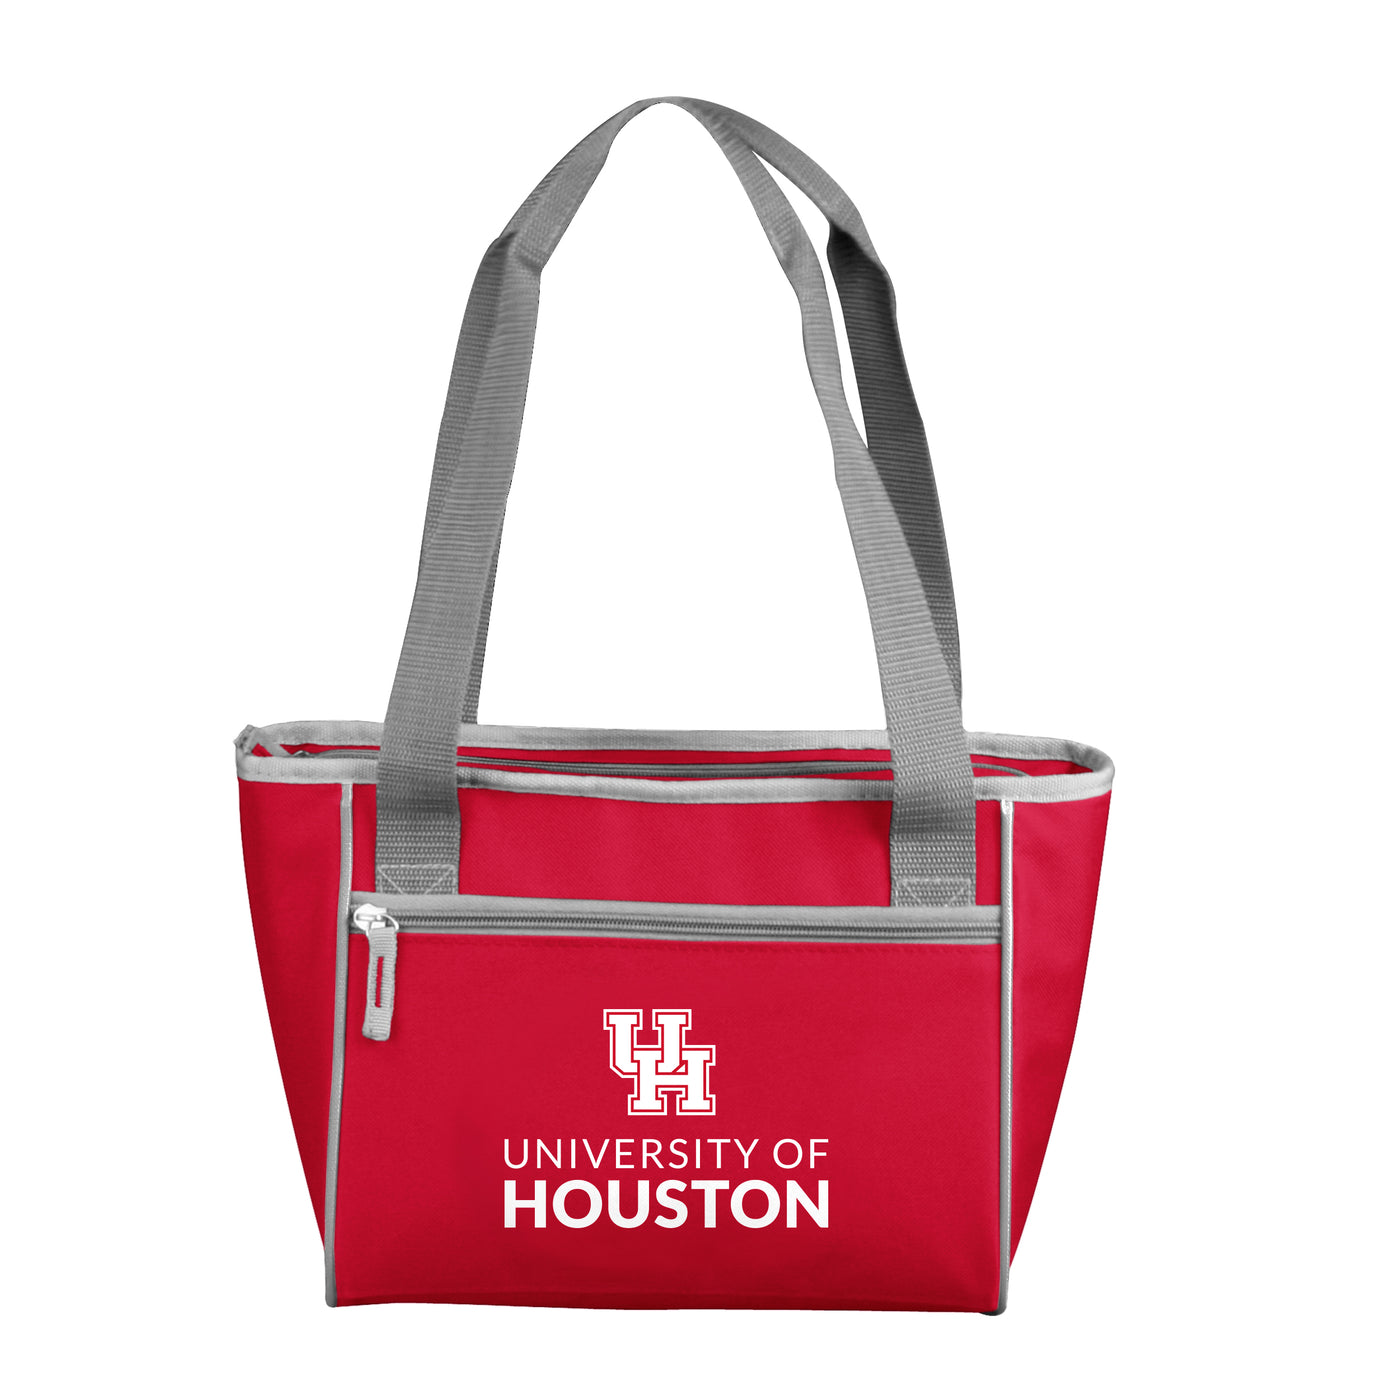 University of Houston Sugarland 16 Can Cooler Tote